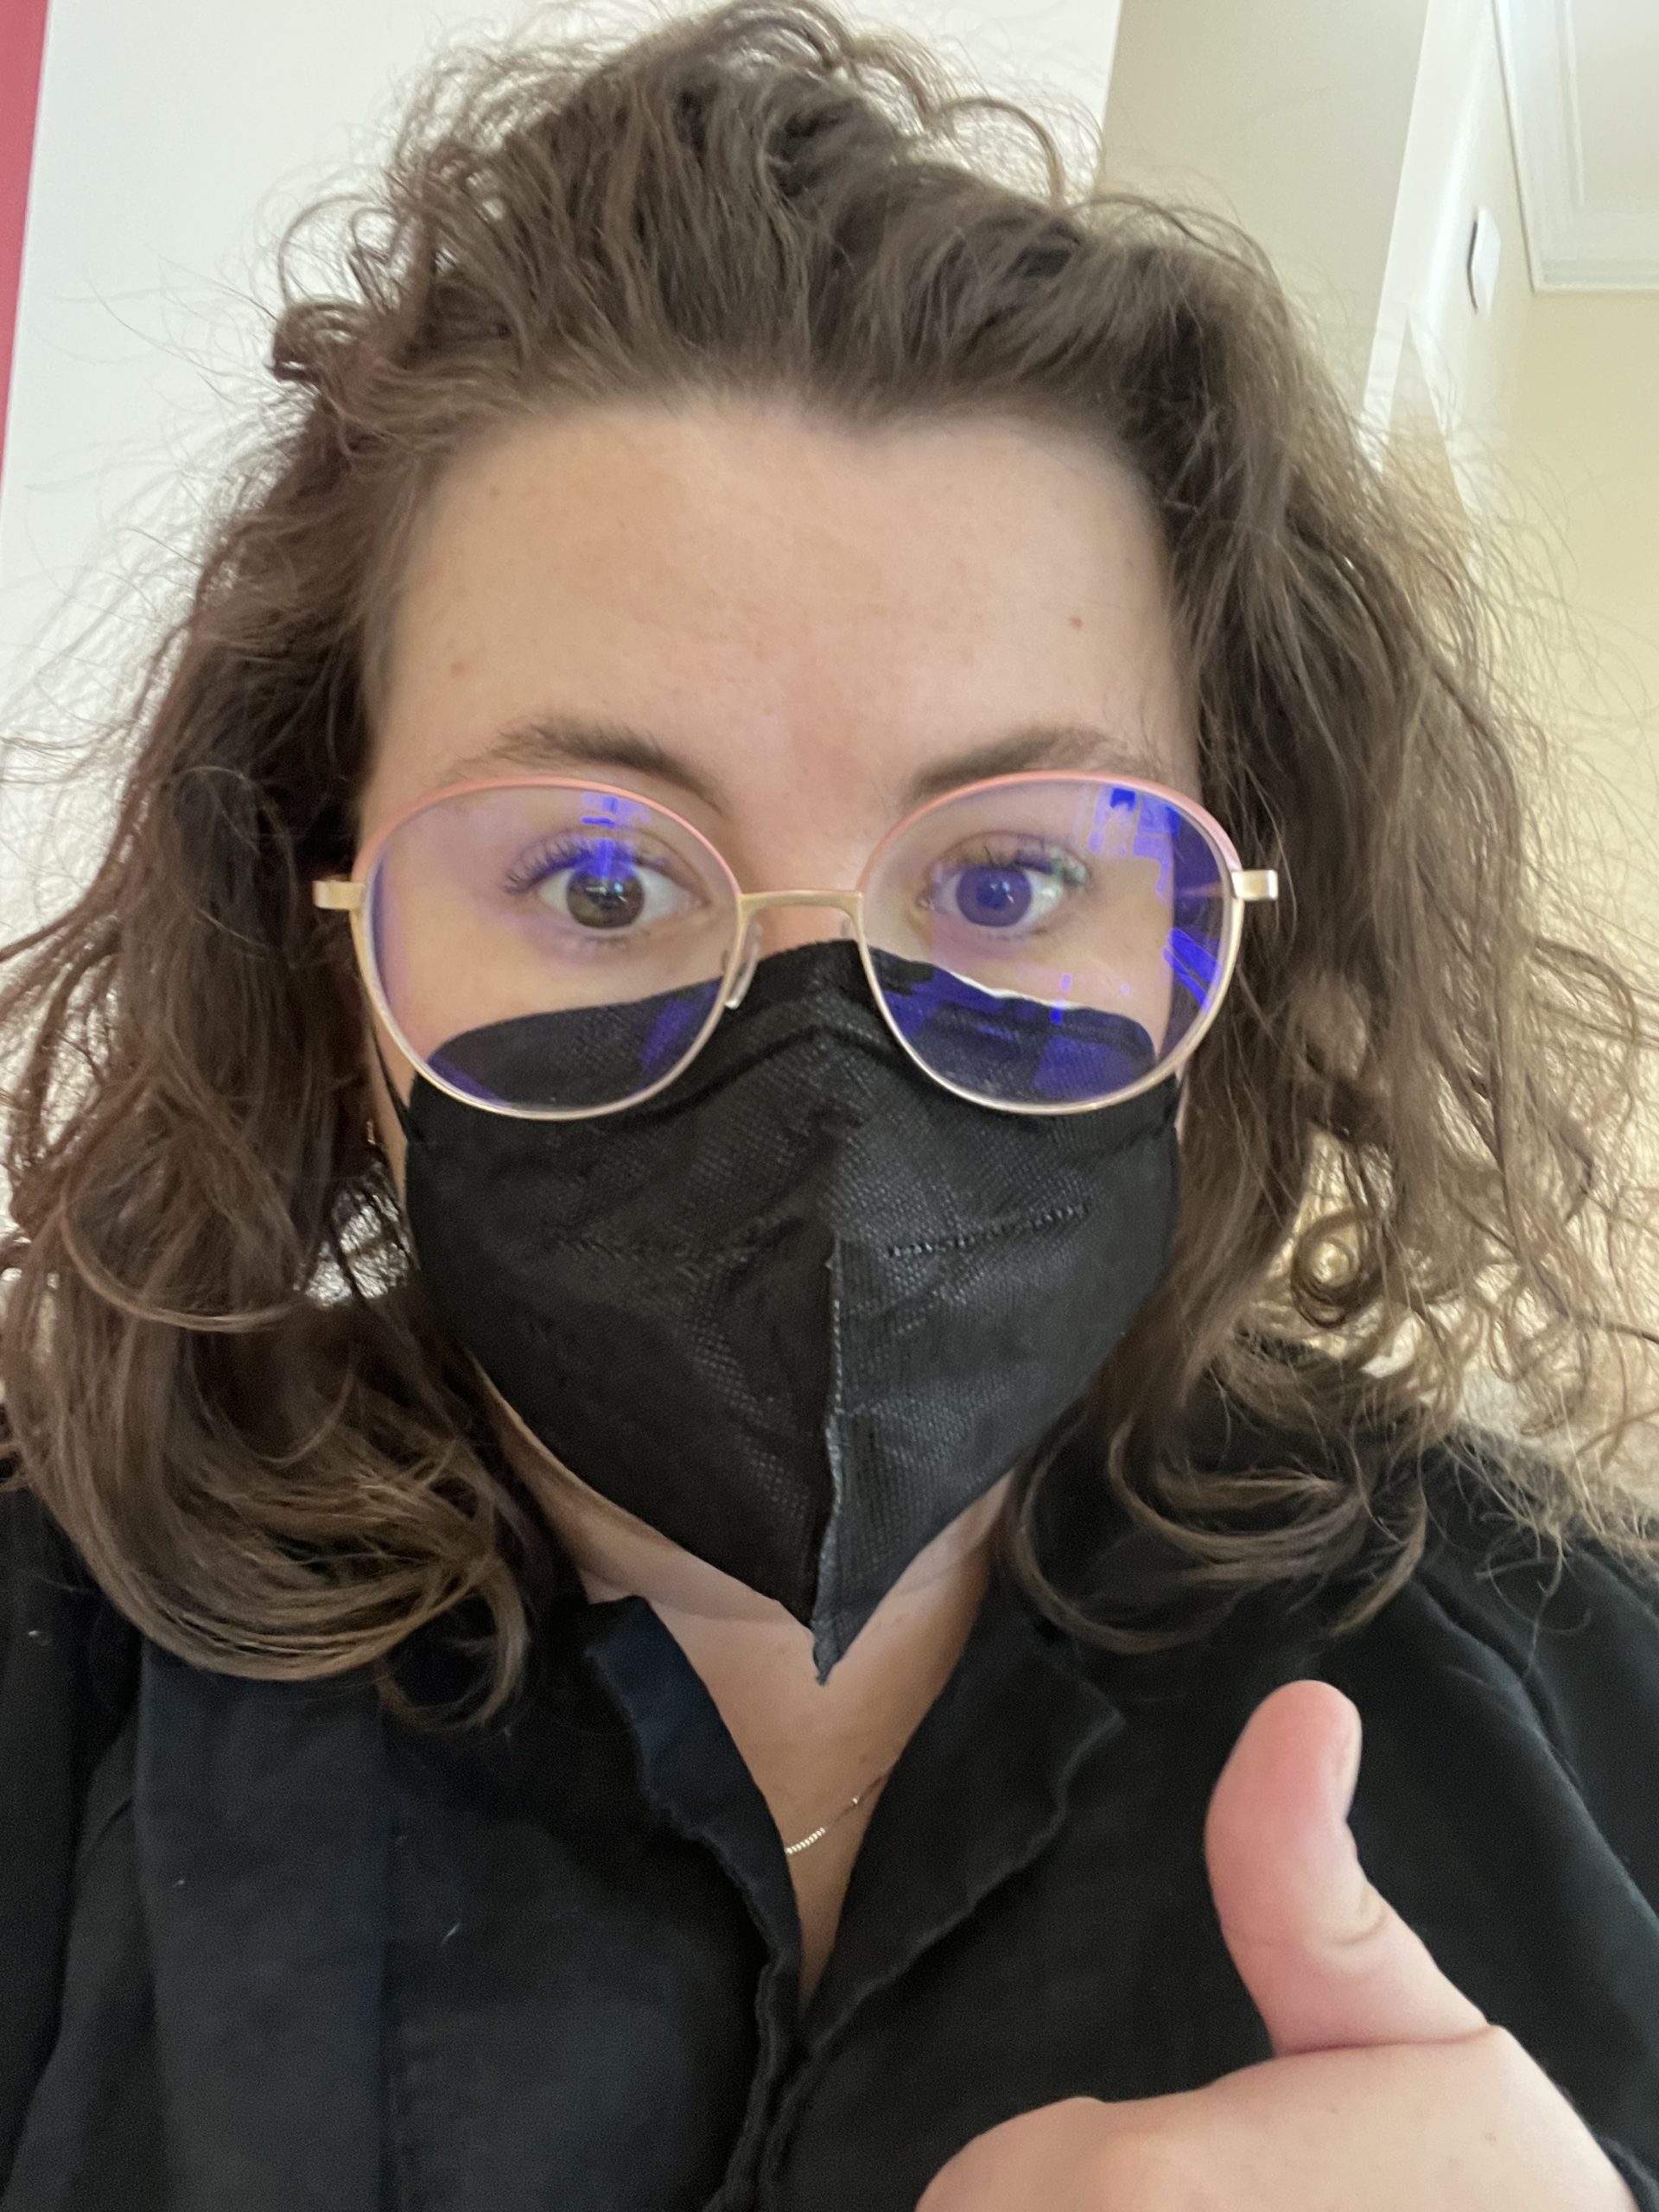 Emma wearing a black facemask, giving a thumbs up. She has glasses and is wearing a black collared shirt.